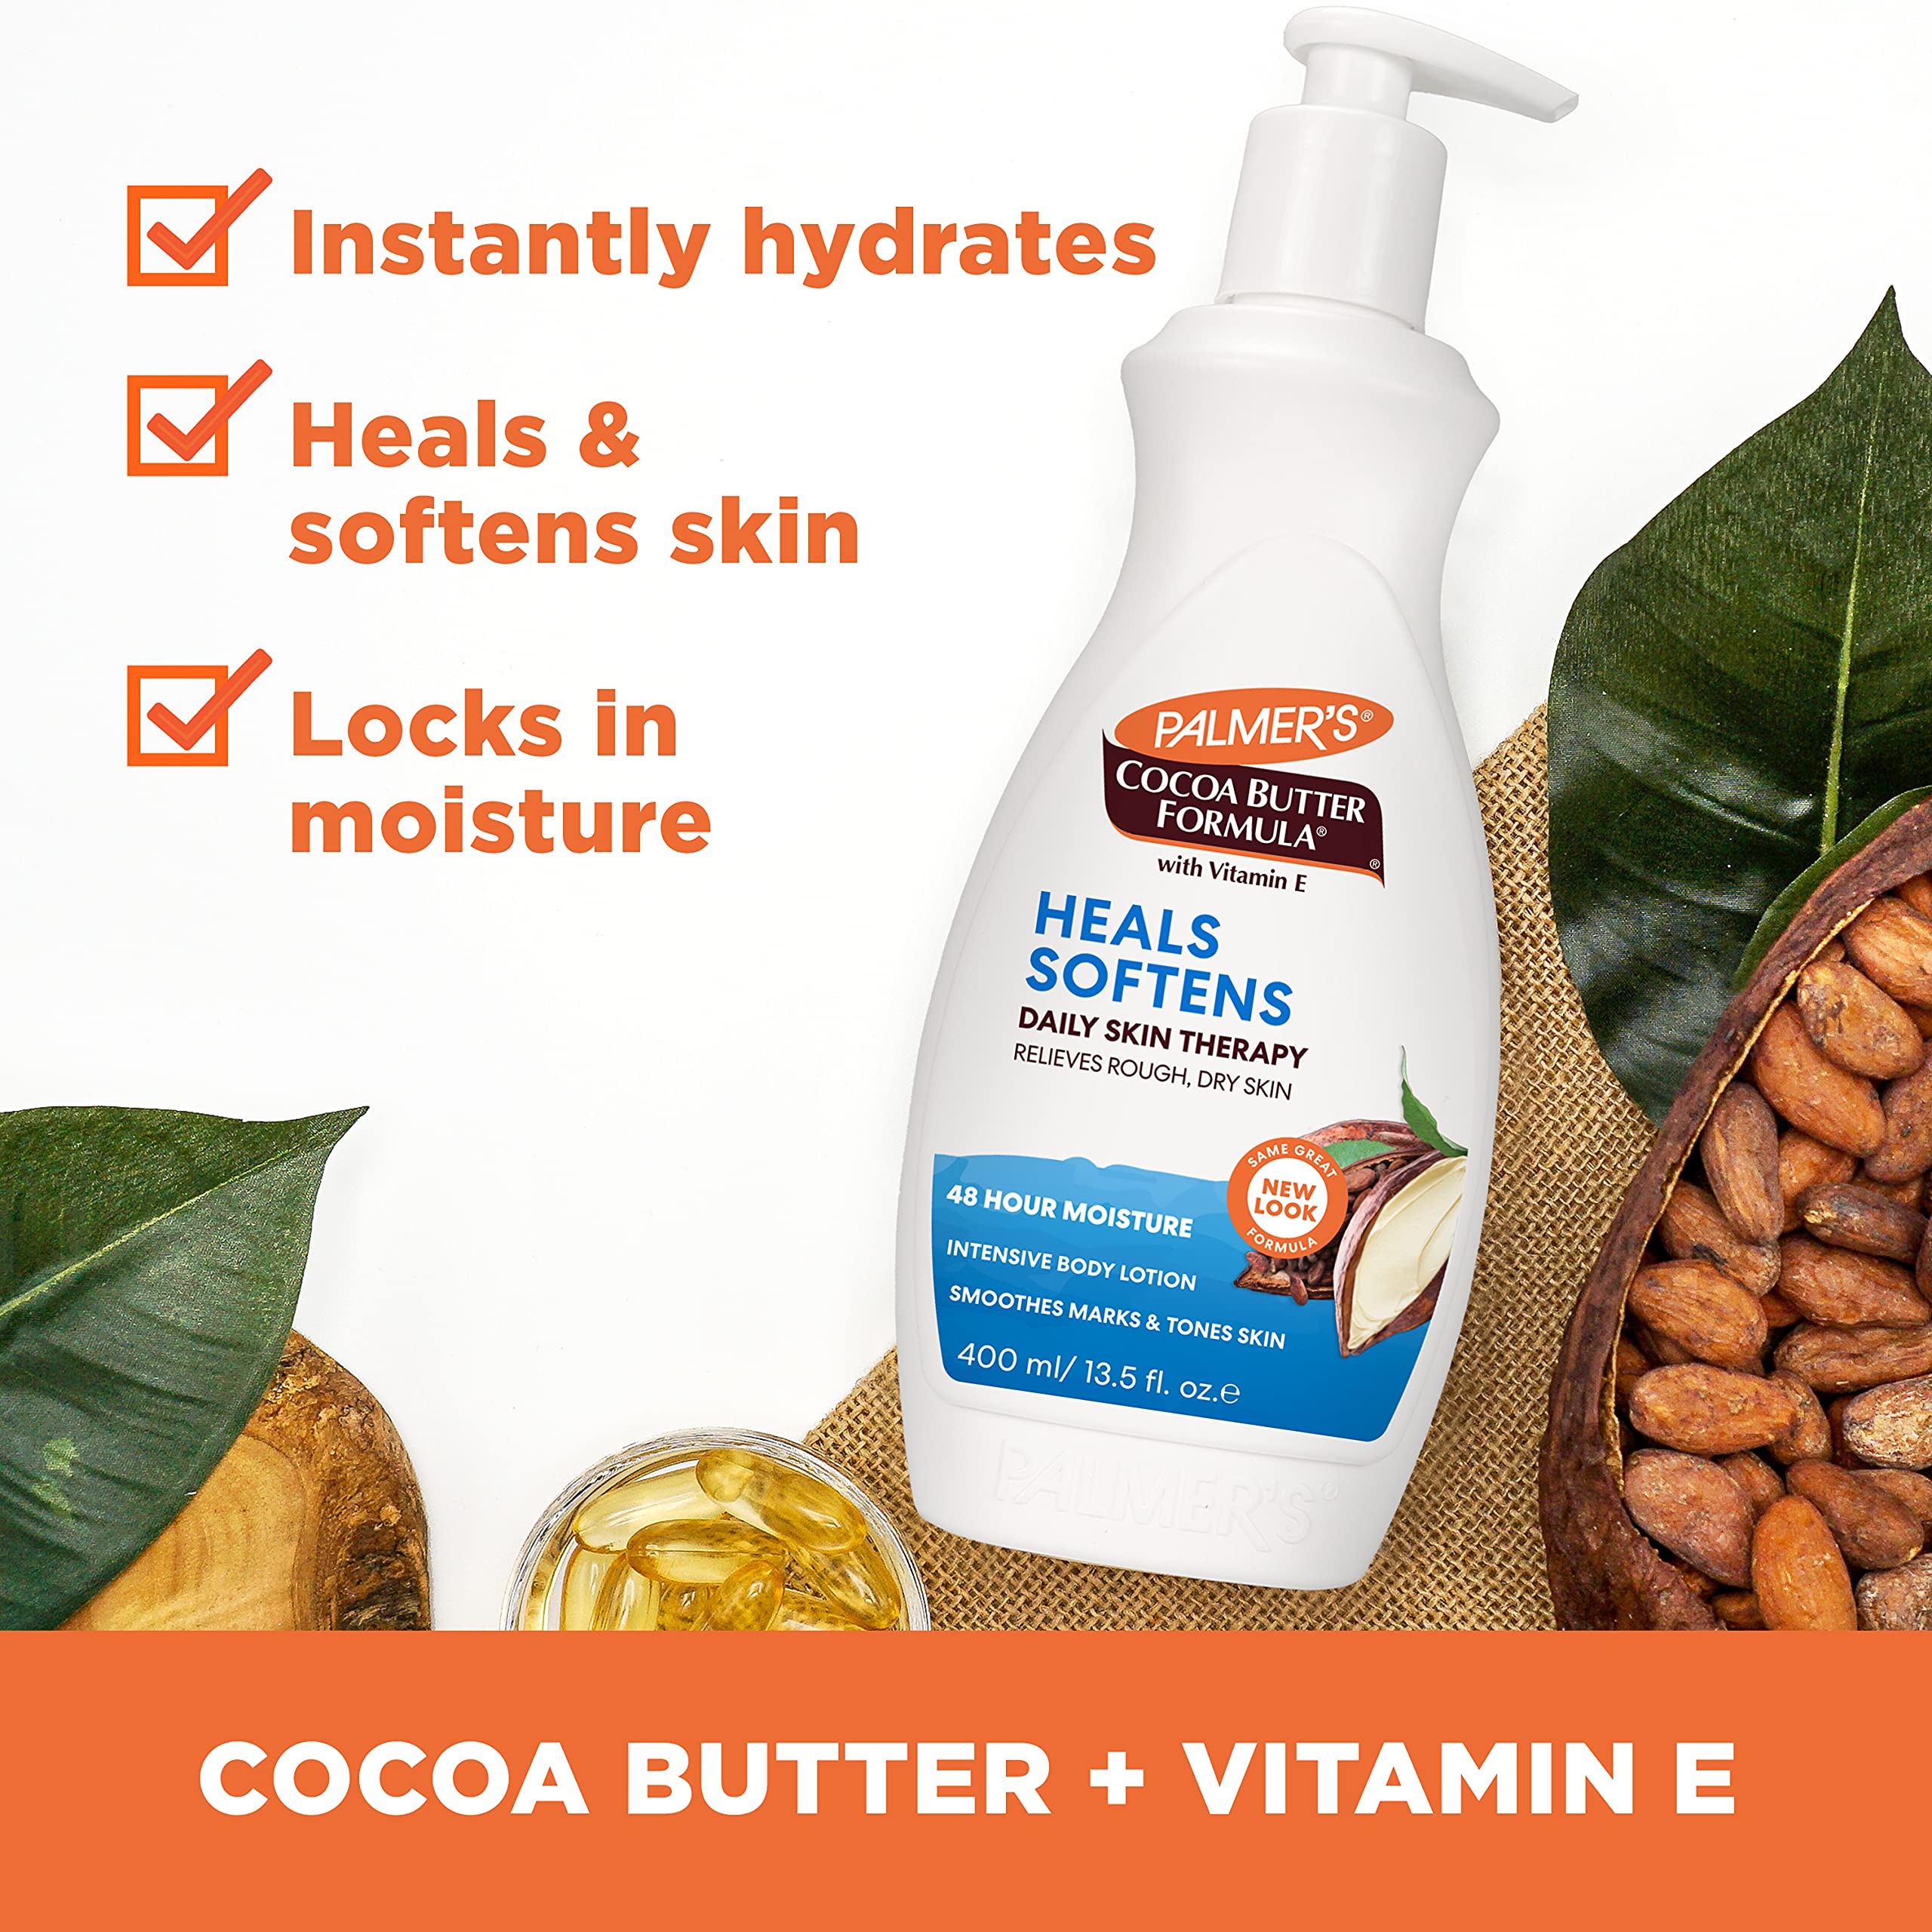 Palmer's Cocoa Butter Formula Daily Skin Therapy Body Lotion with Vitamin E, 13.5 Fl Oz (Pack of 12)